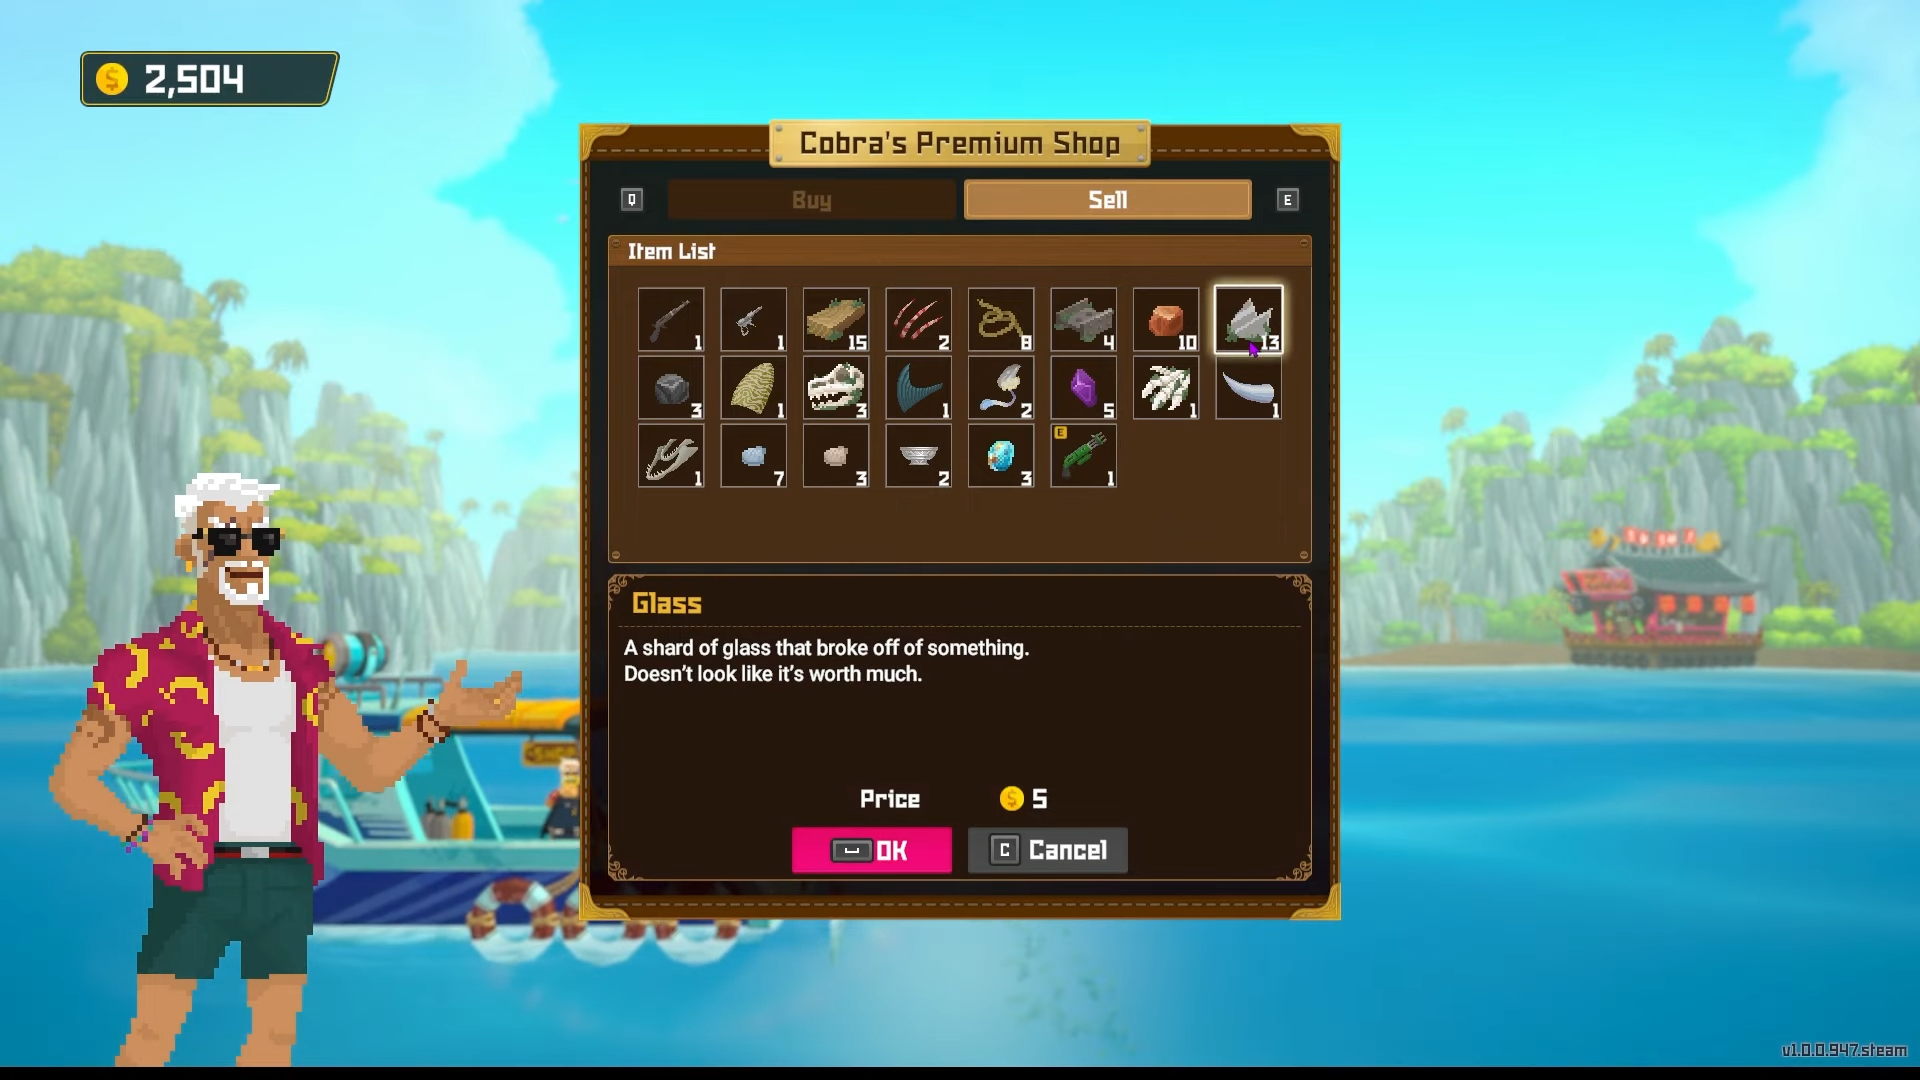 Selling items at Cobra's premium shop on a boat.